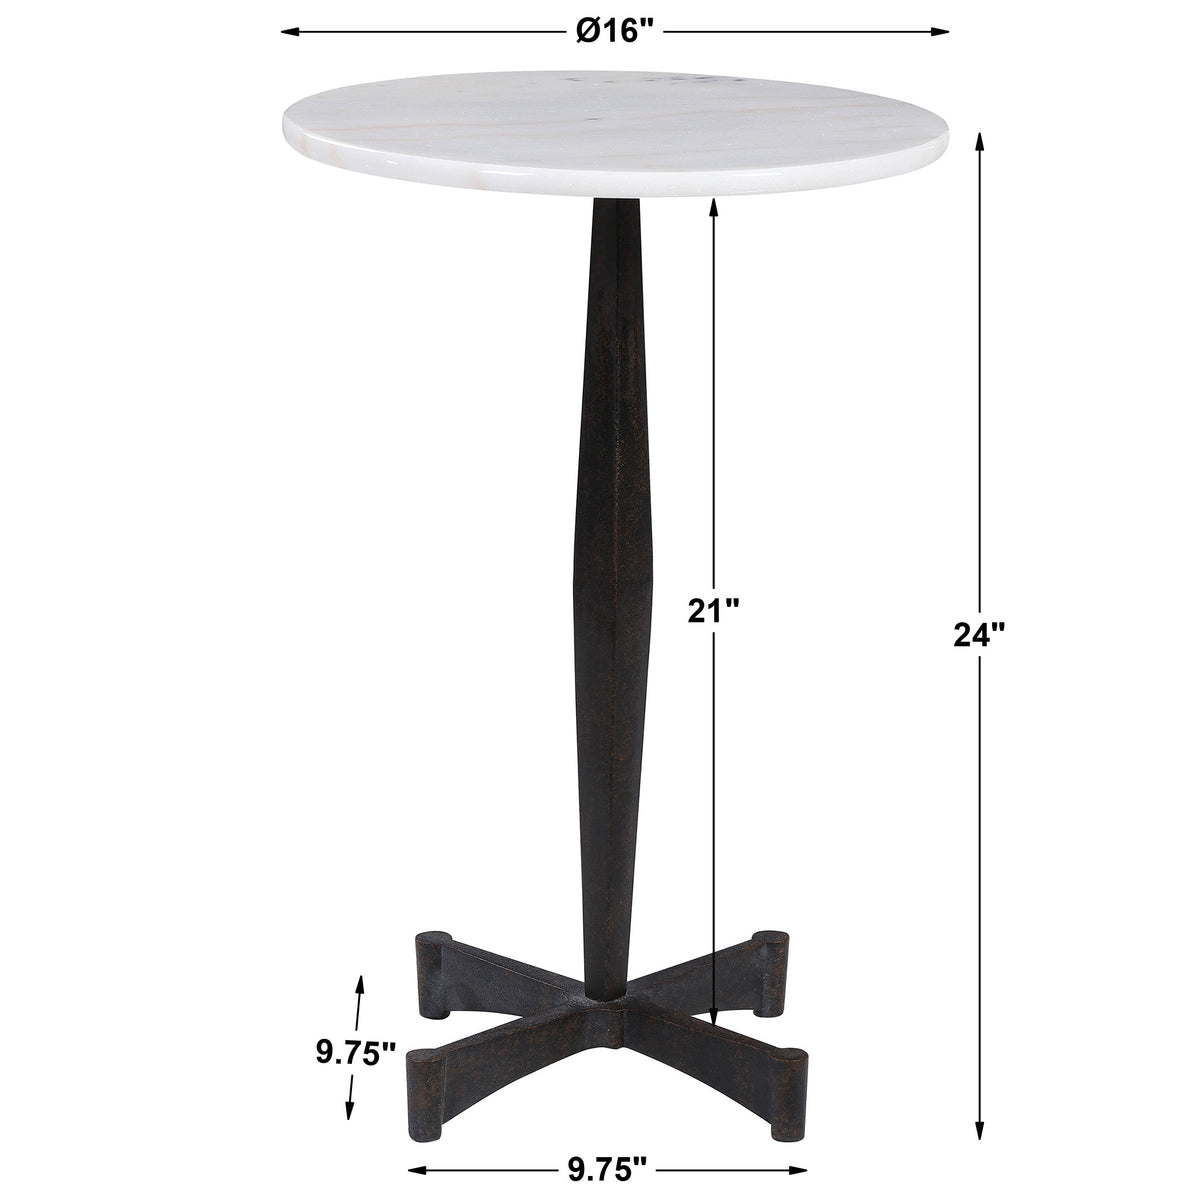 Uttermost Counteract White Accent Table